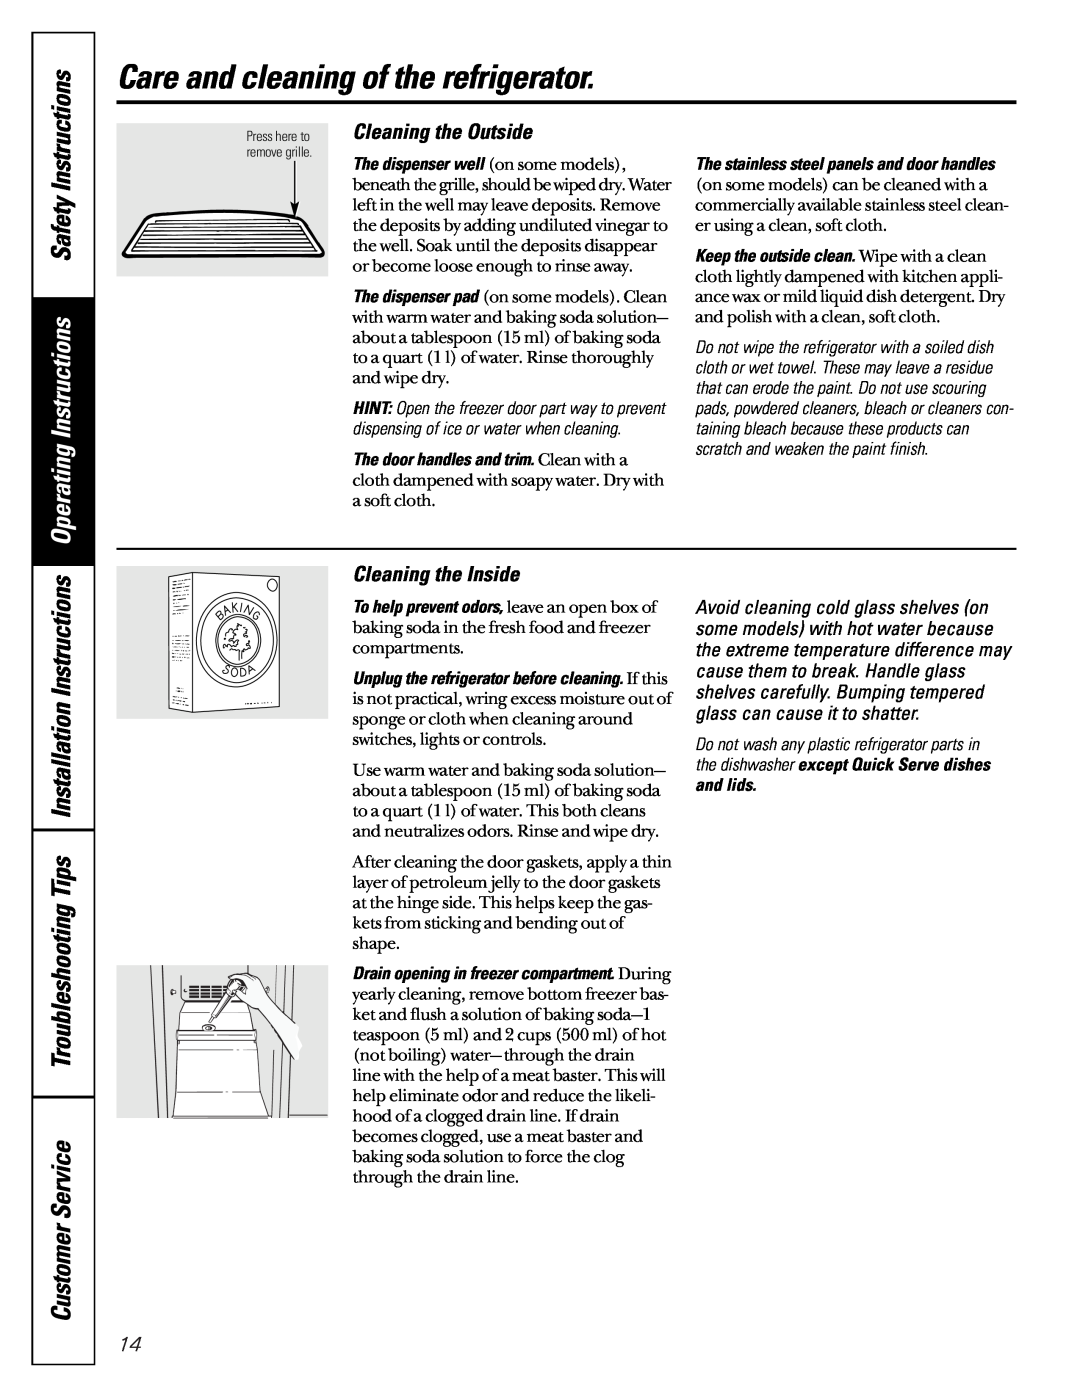 GE 22-27 owner manual Care and cleaning of the refrigerator, Cleaning the Outside, Cleaning the Inside, CustomerService 